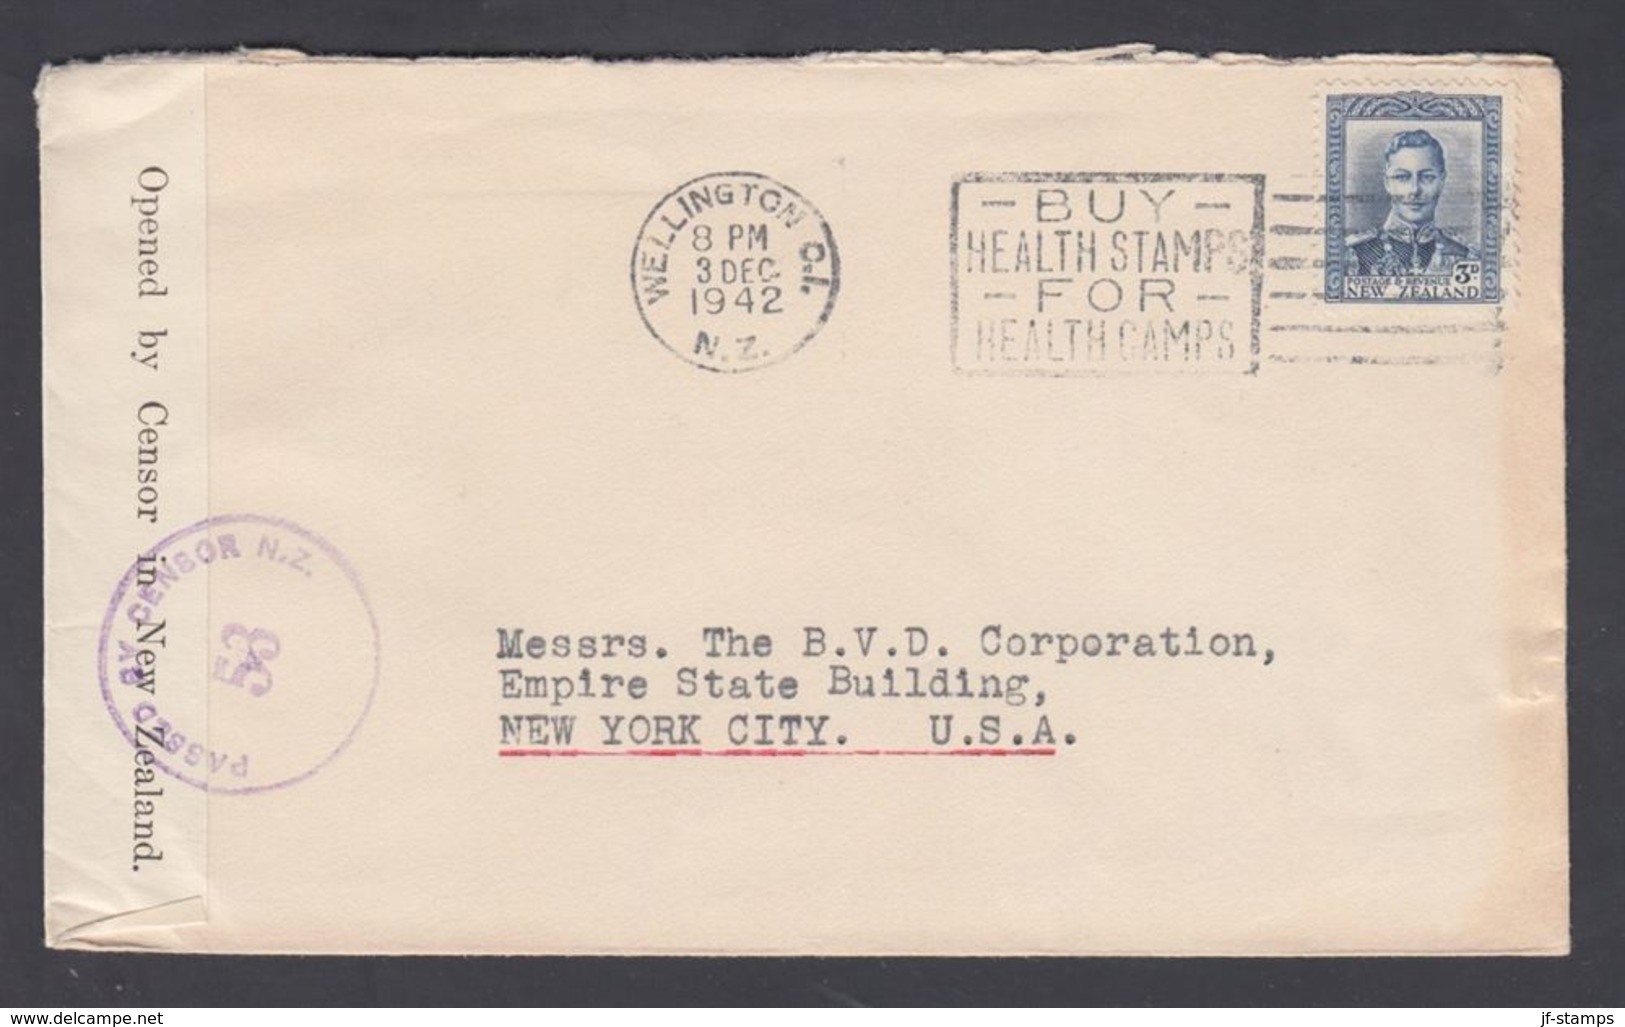 1942. New Zealand. Georg VI 3 D On Cover To New York, USA From WELLINGTON N.Z. 3 DEC ... (MICHEL 243) - JF323582 - Briefe U. Dokumente